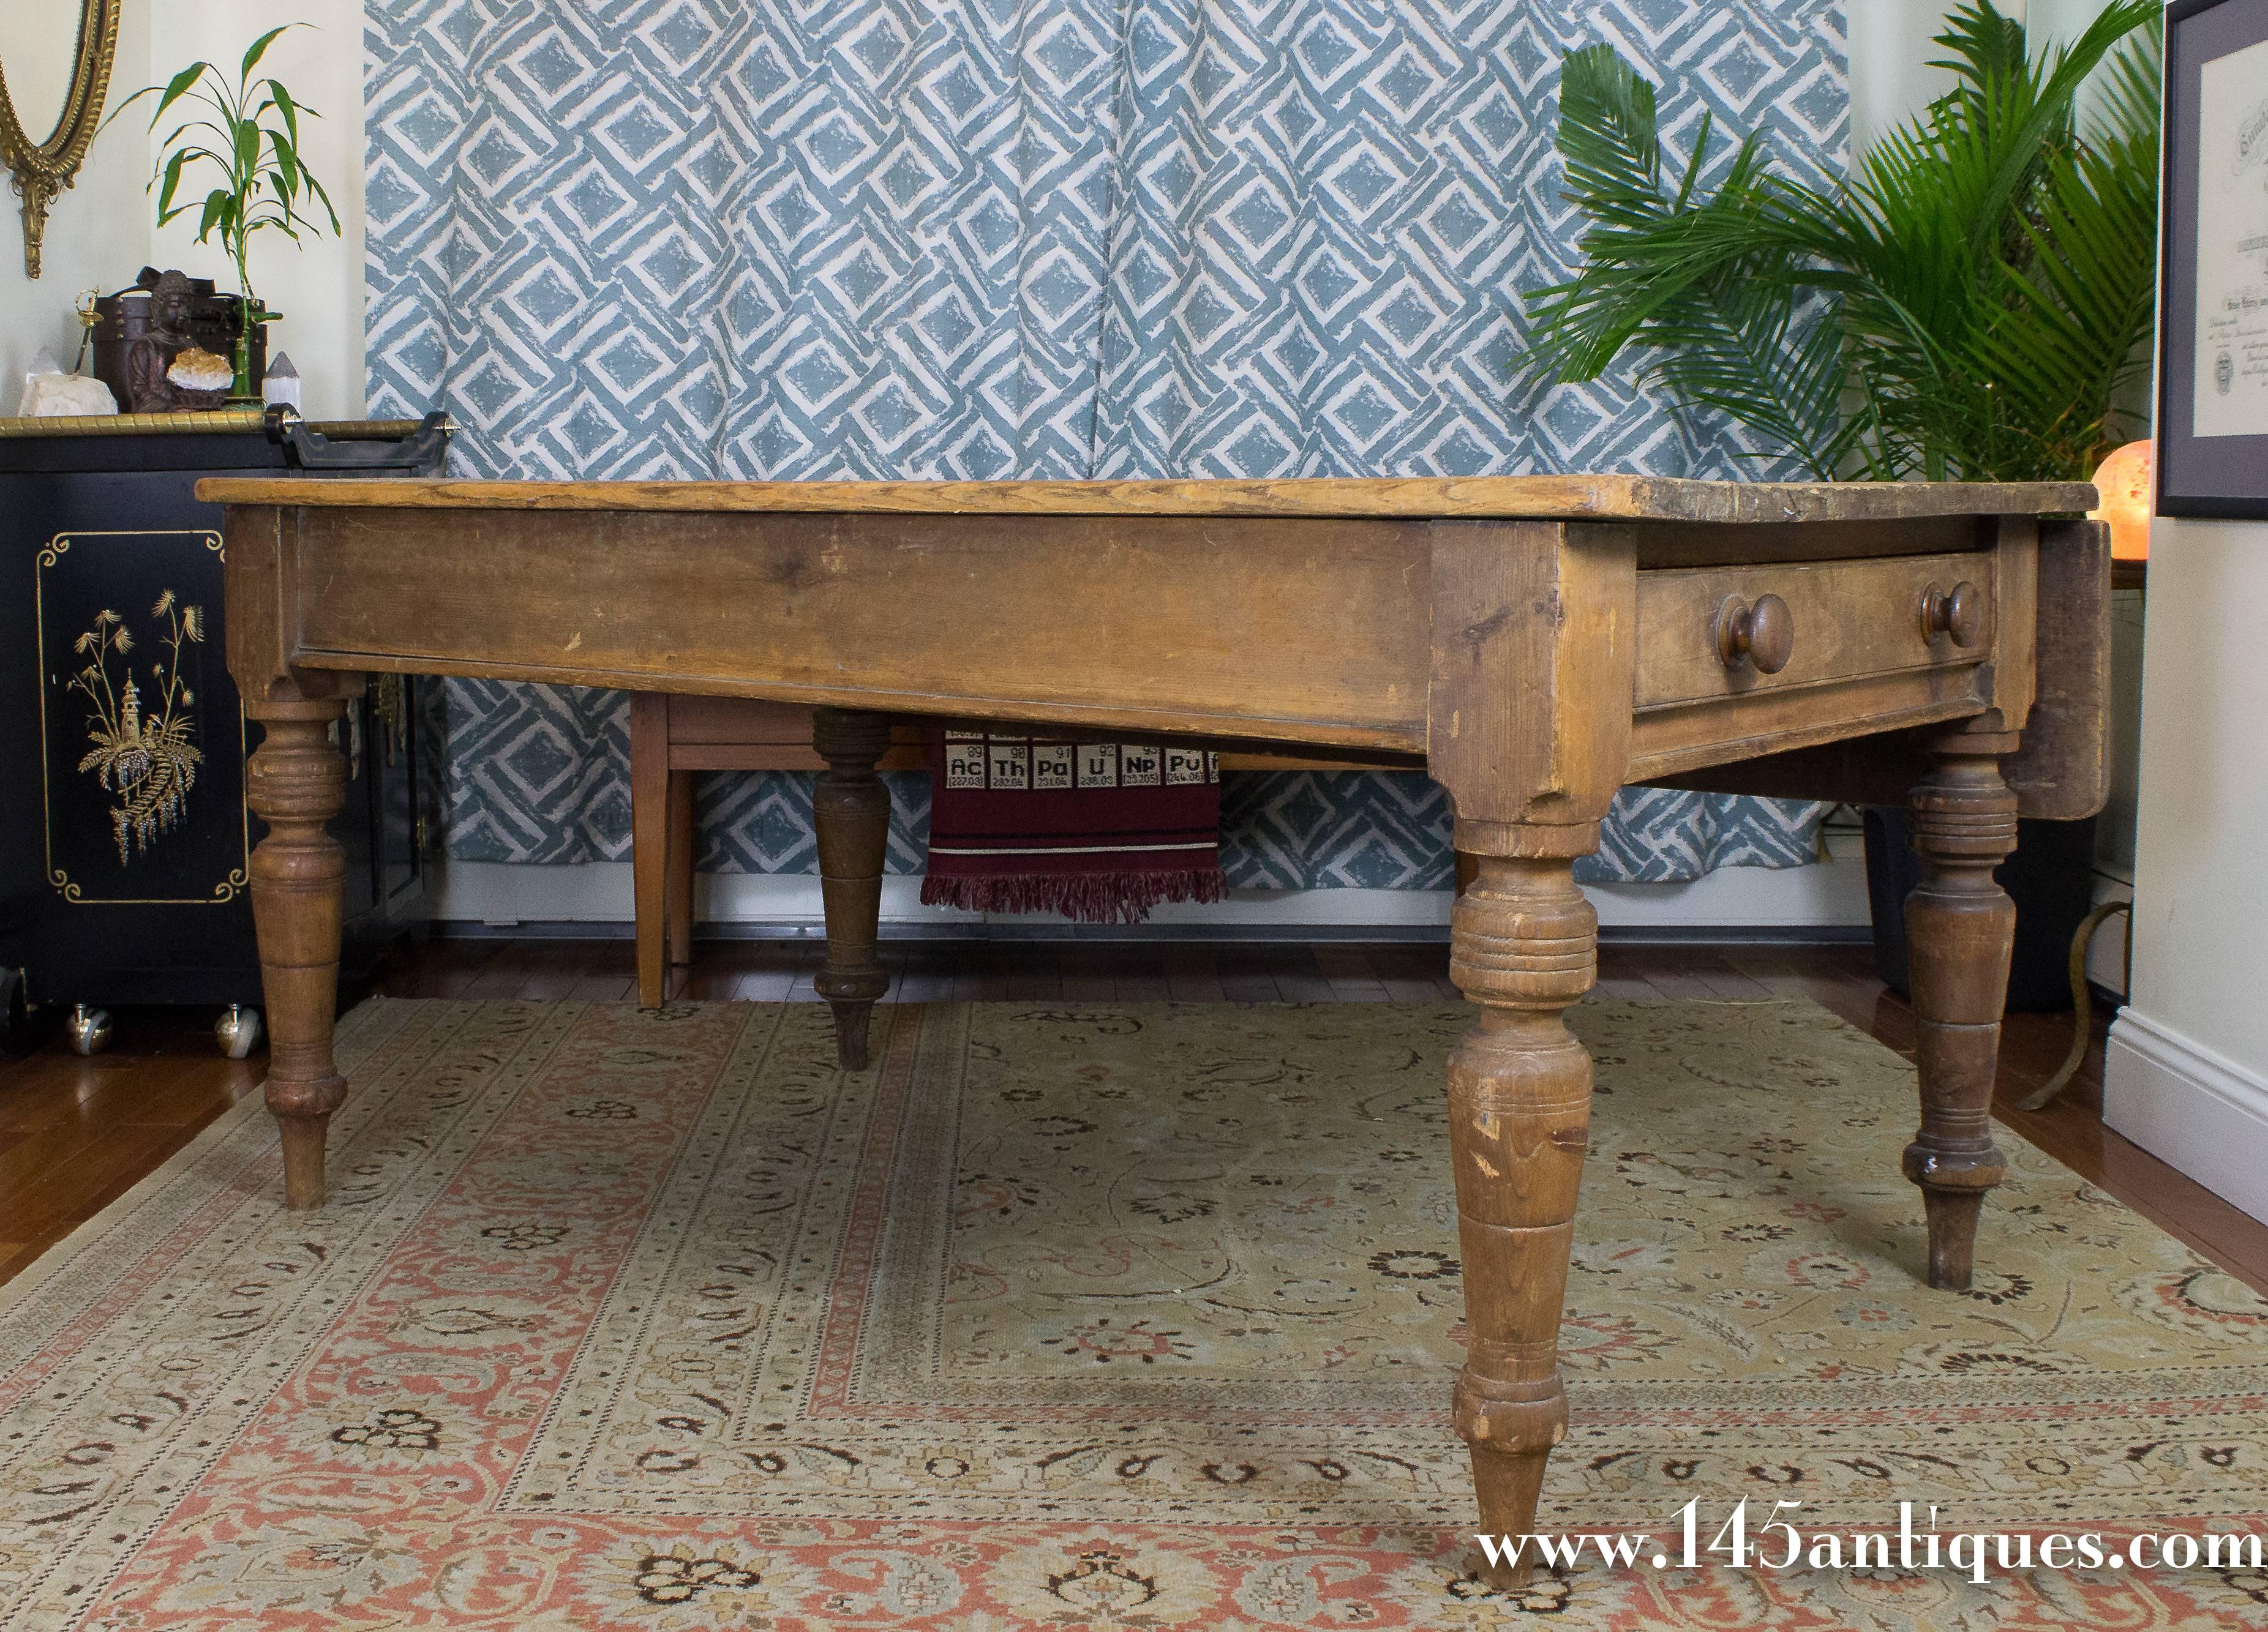 19th century English farm table made of solid pine wood with drop-leaf on one side (adds 11